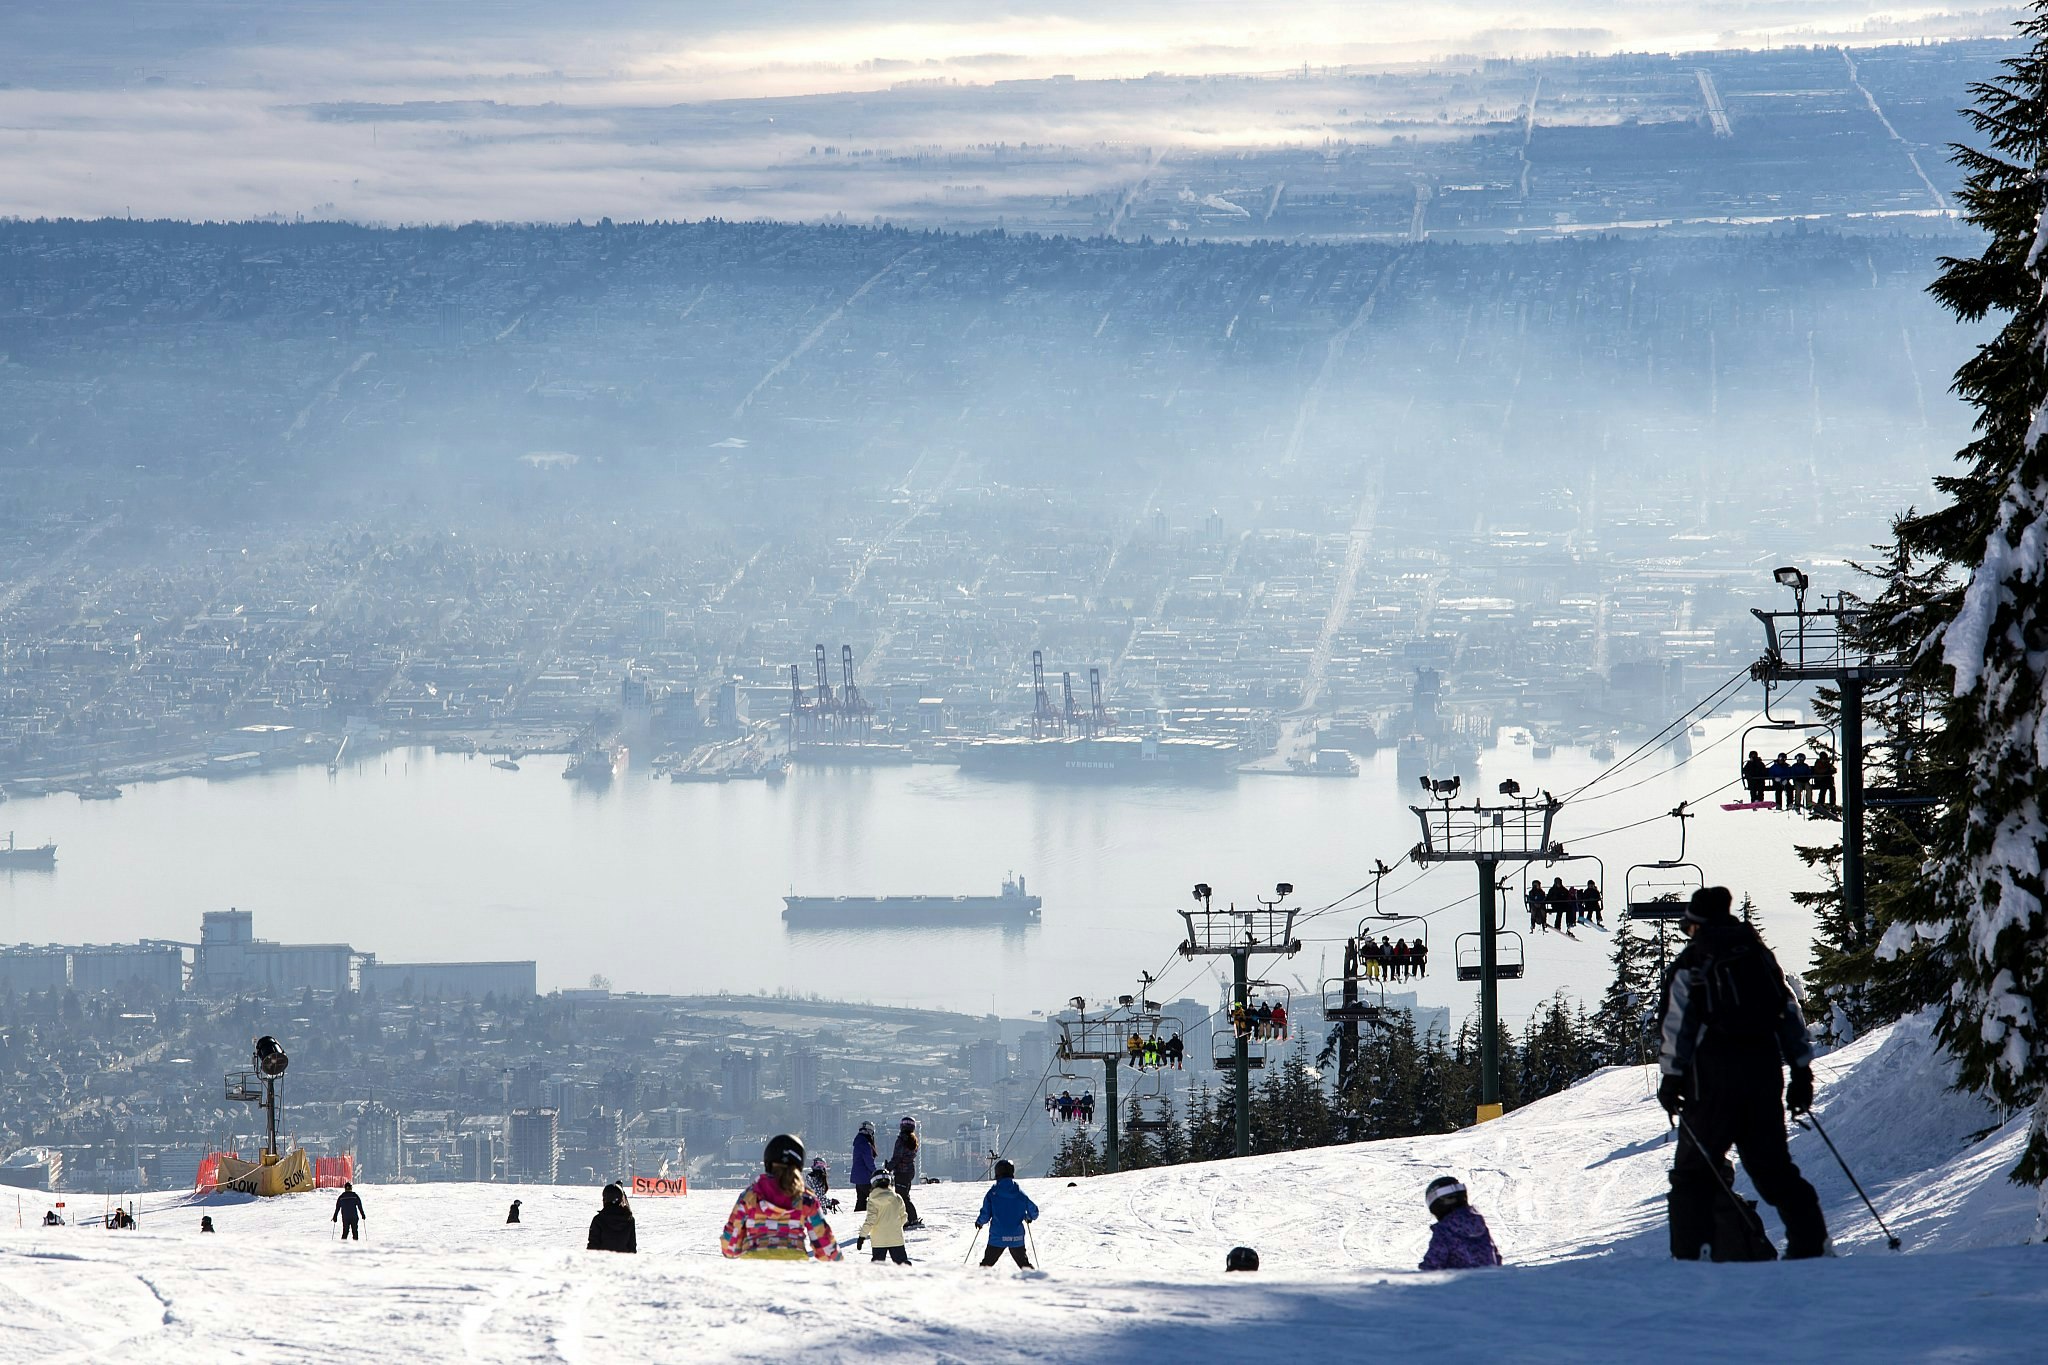 Skiers on a ski slope at the top of Grouse Mountain in Vancouver, next to trees and a ski lift; below is the city skyline, bisected by a wide harbour.